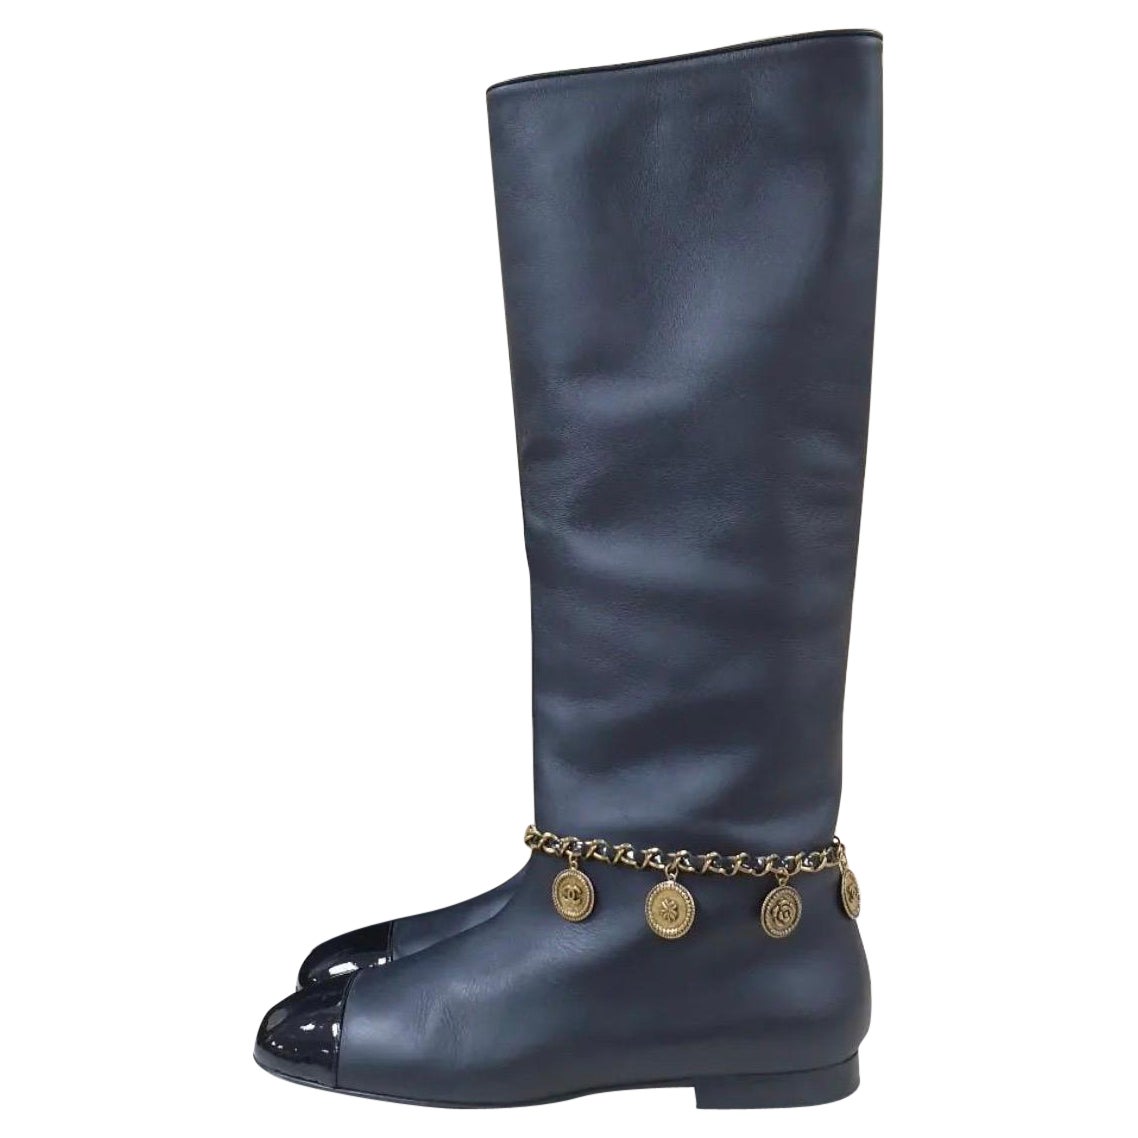 Chanel Over the Knee Black Leather Boots Gold Toe and Heels Size 38 Rare!